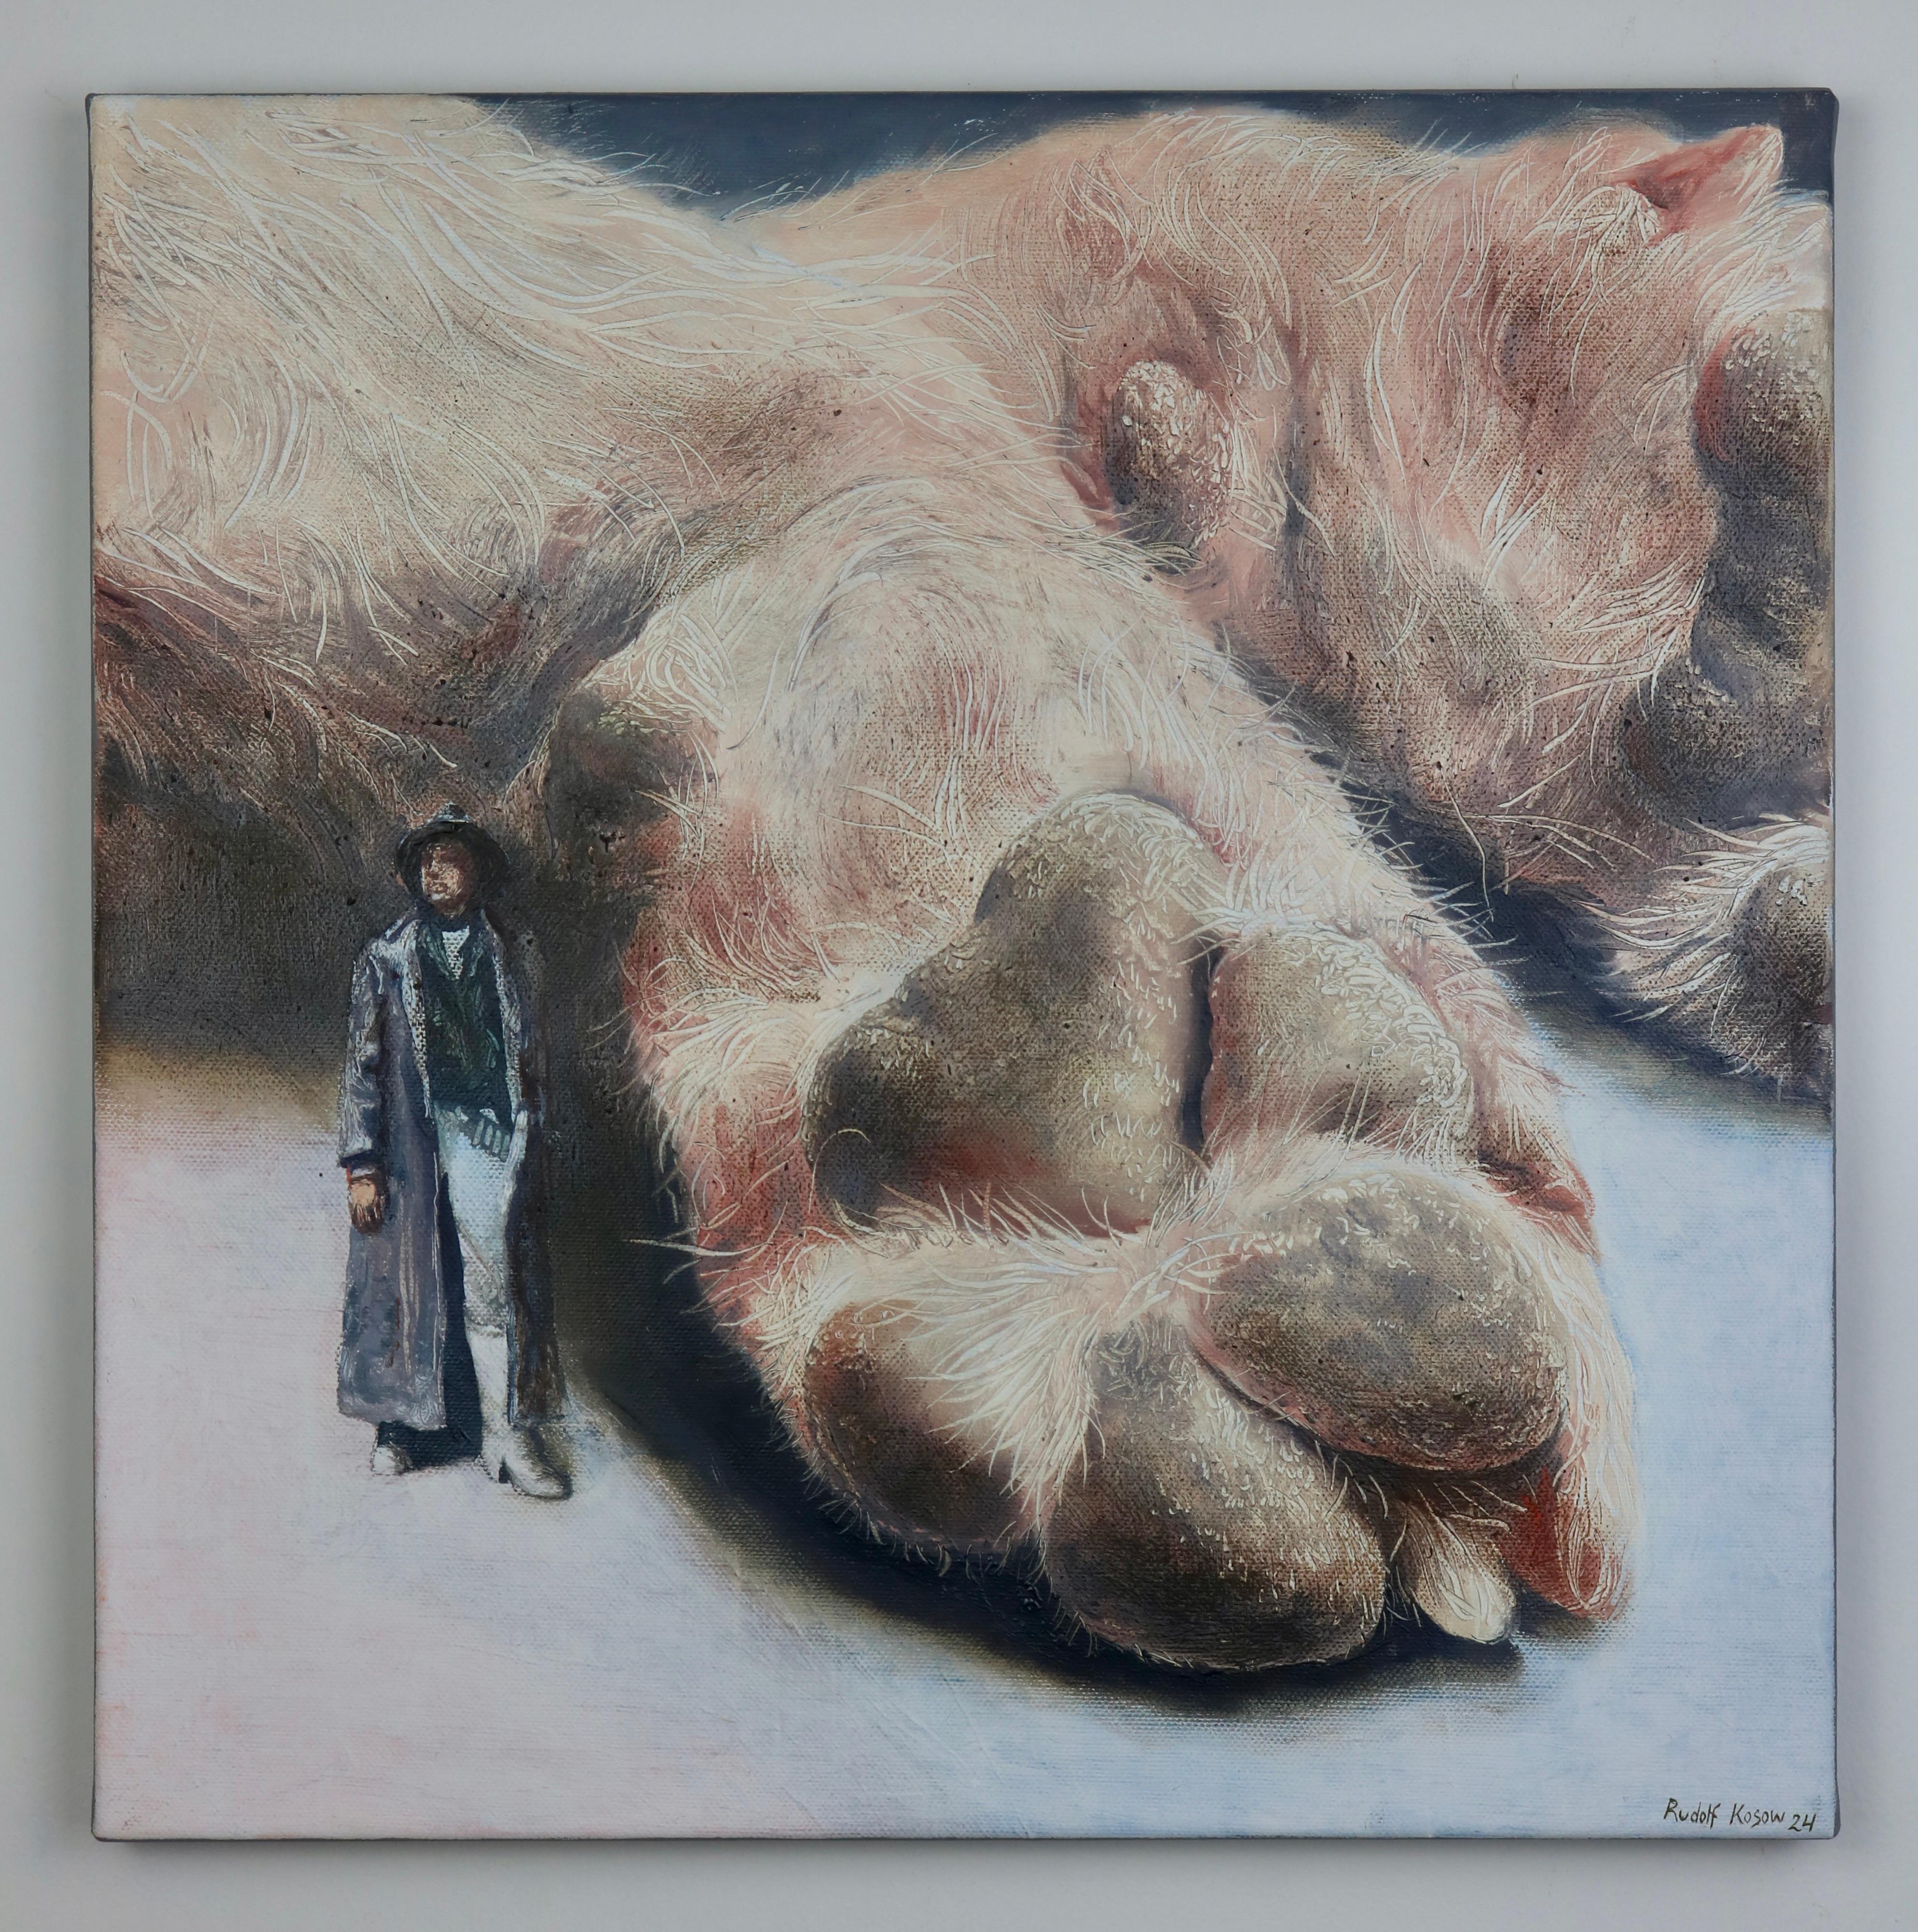 In this evocative piece by Rudolf Kosow, we are confronted with the signature elements of surrealism that define his work. The canvas is dominated by the vastness of a feline's paw, each hair and pad depicted with an intense realism that feels